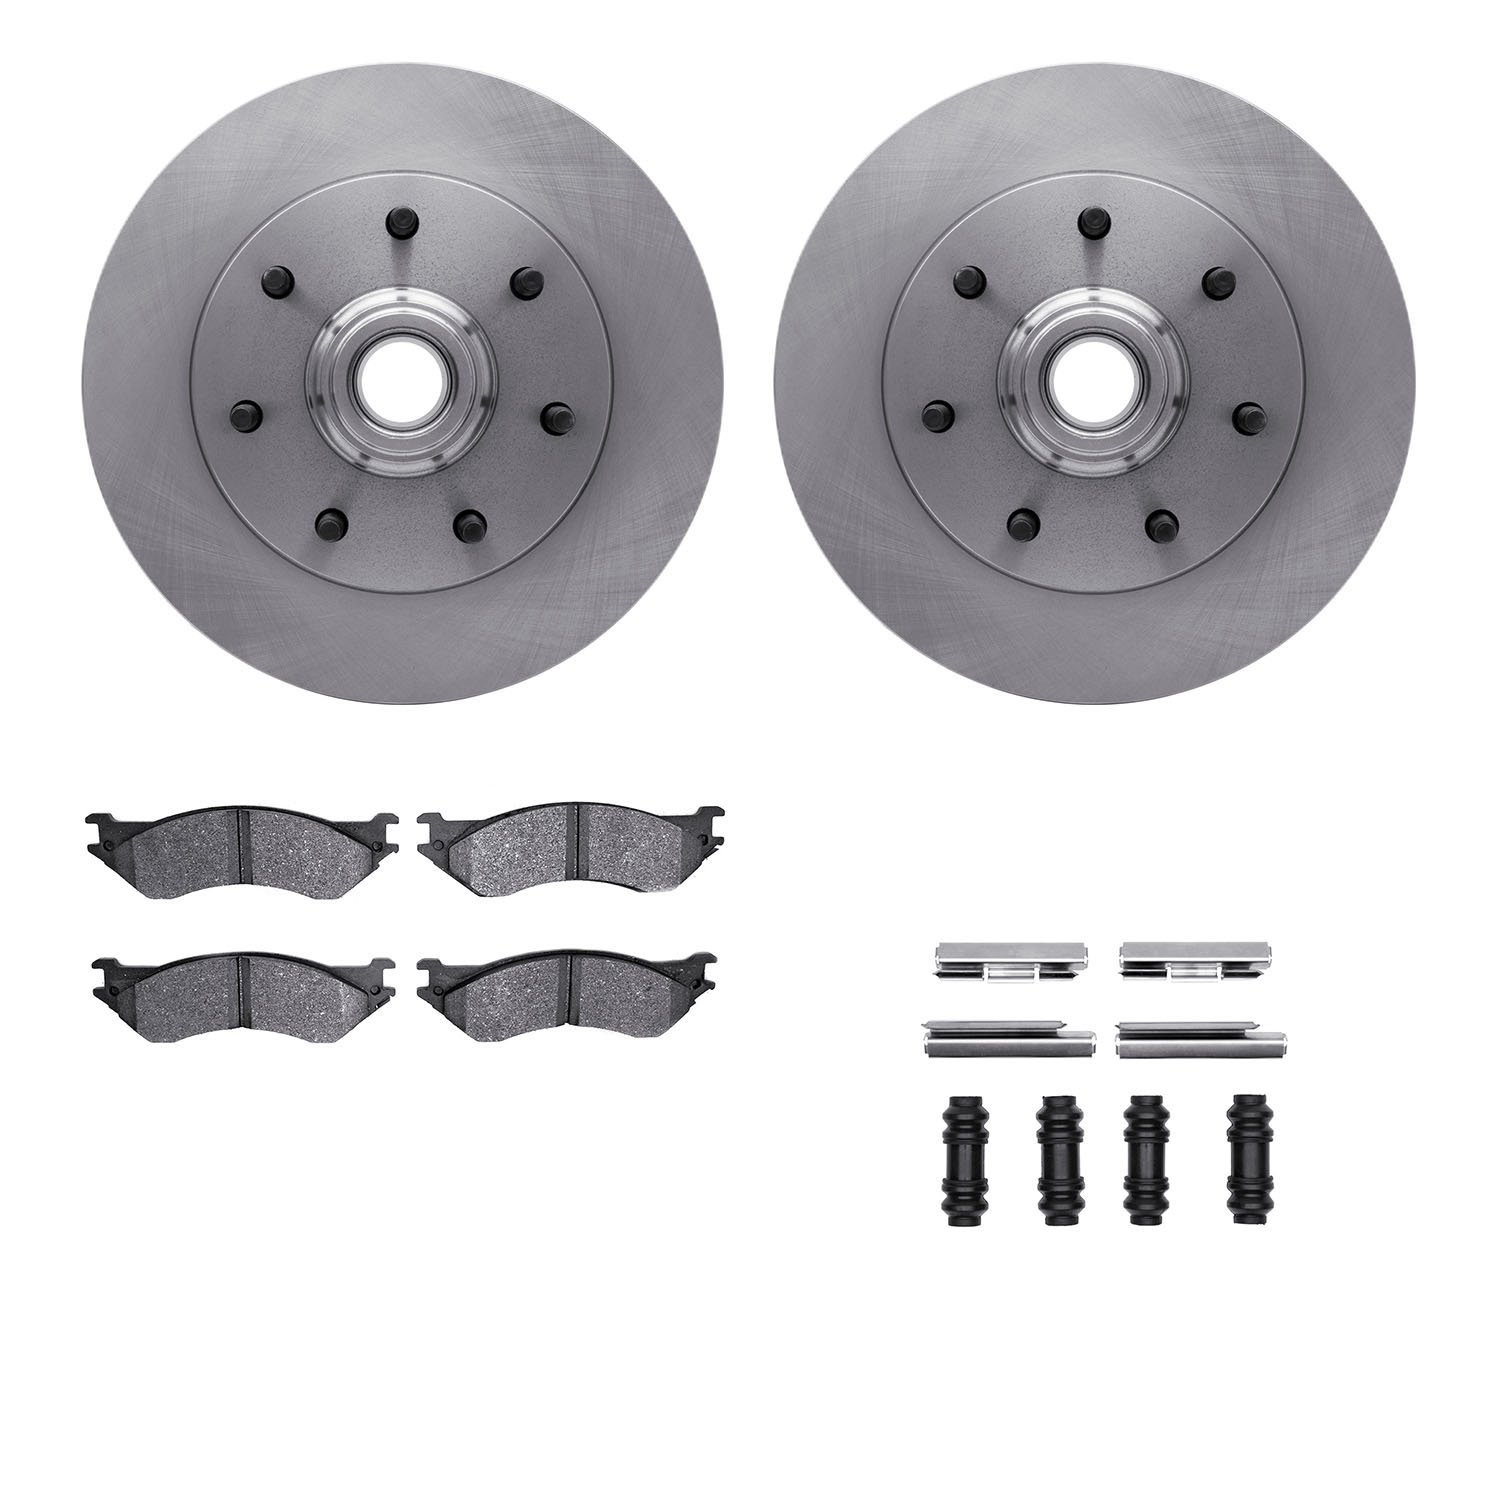 6412-54104 Brake Rotors with Ultimate-Duty Brake Pads Kit & Hardware, 1997-2004 Ford/Lincoln/Mercury/Mazda, Position: Front